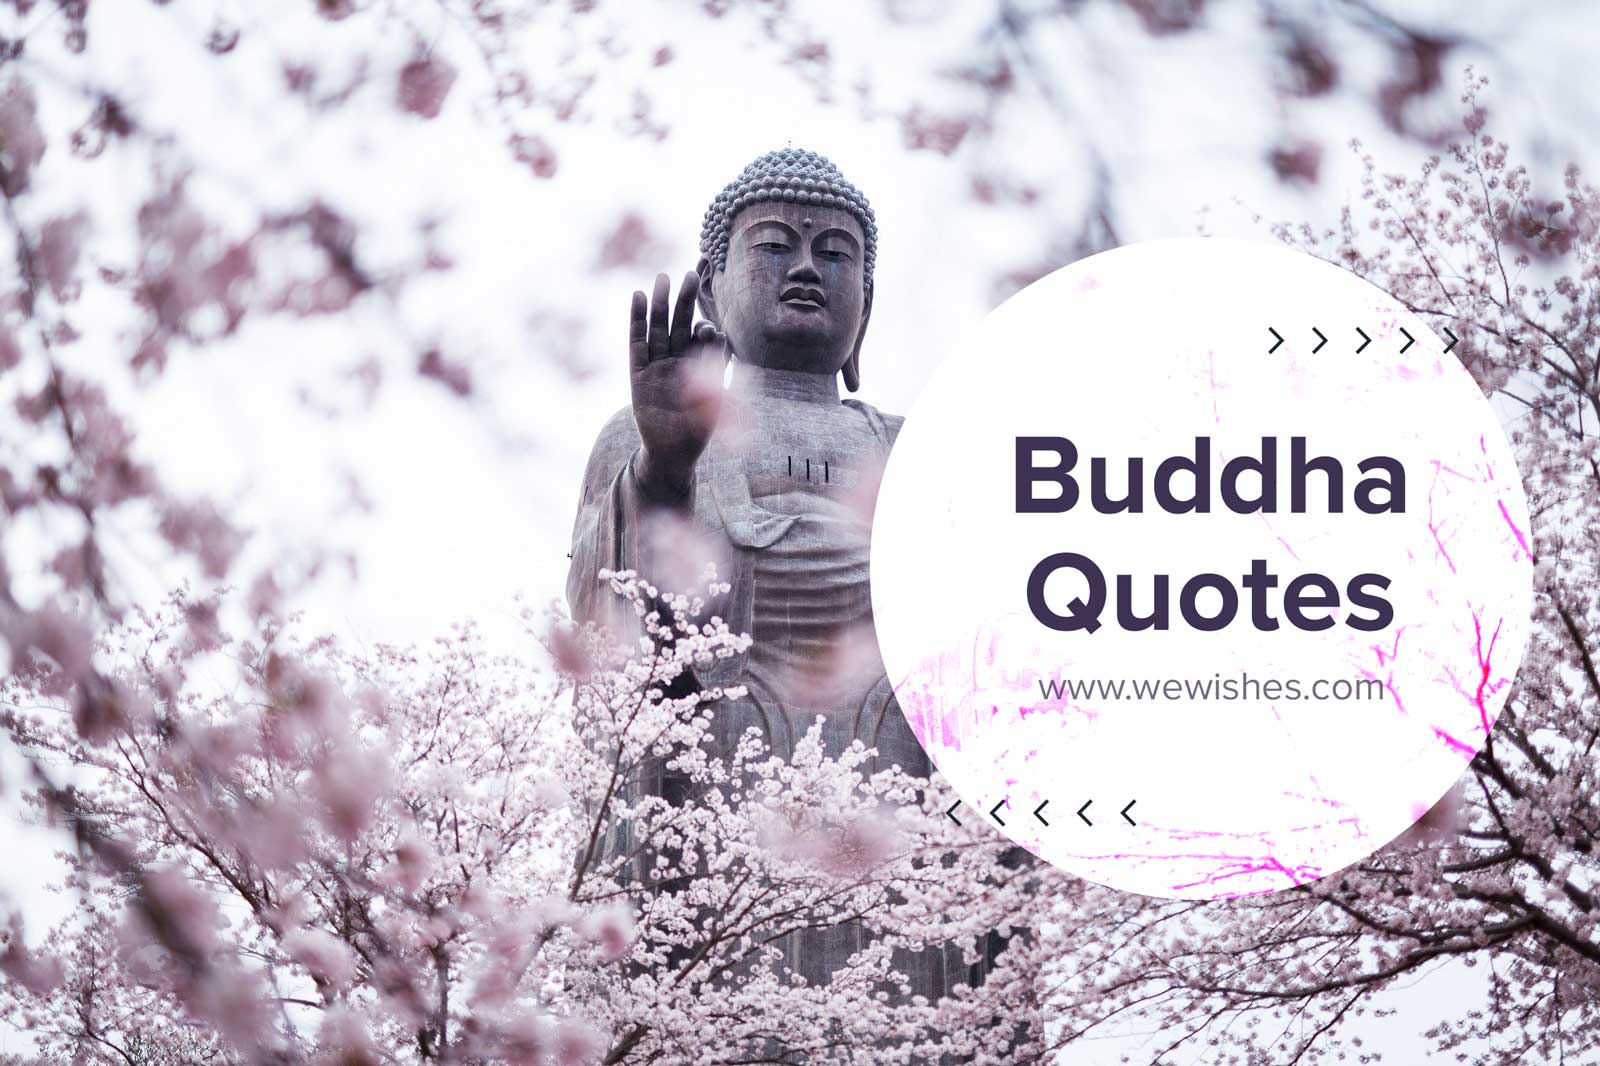 Buddha Quotes That Will Make You Wiser